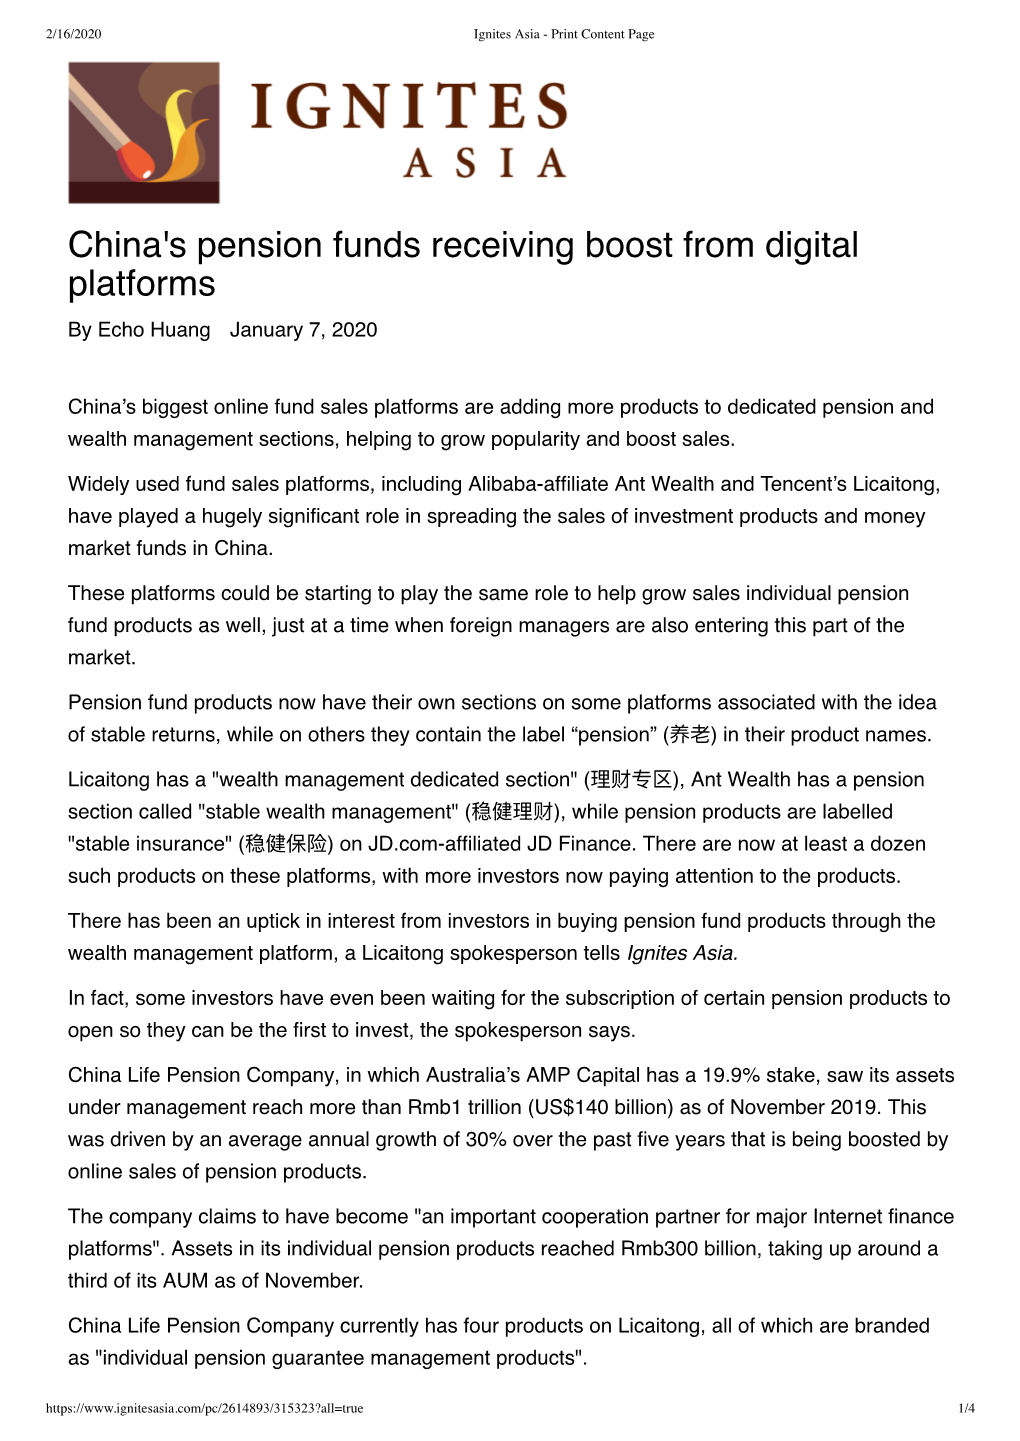 China's Pension Funds Receiving Boost from Digital Platforms by Echo Huang January 7, 2020